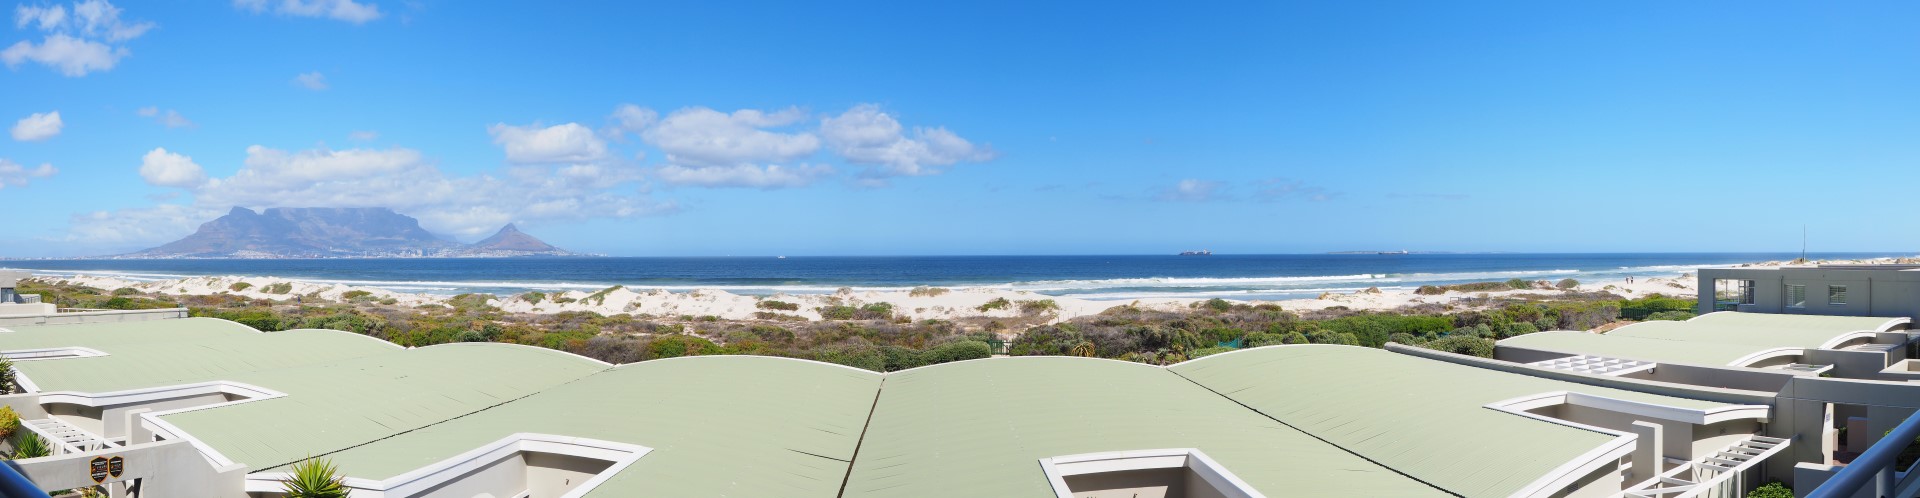 Photo 11 of Dolphin Beach Beauty accommodation in Bloubergstrand, Cape Town with 3 bedrooms and 2 bathrooms